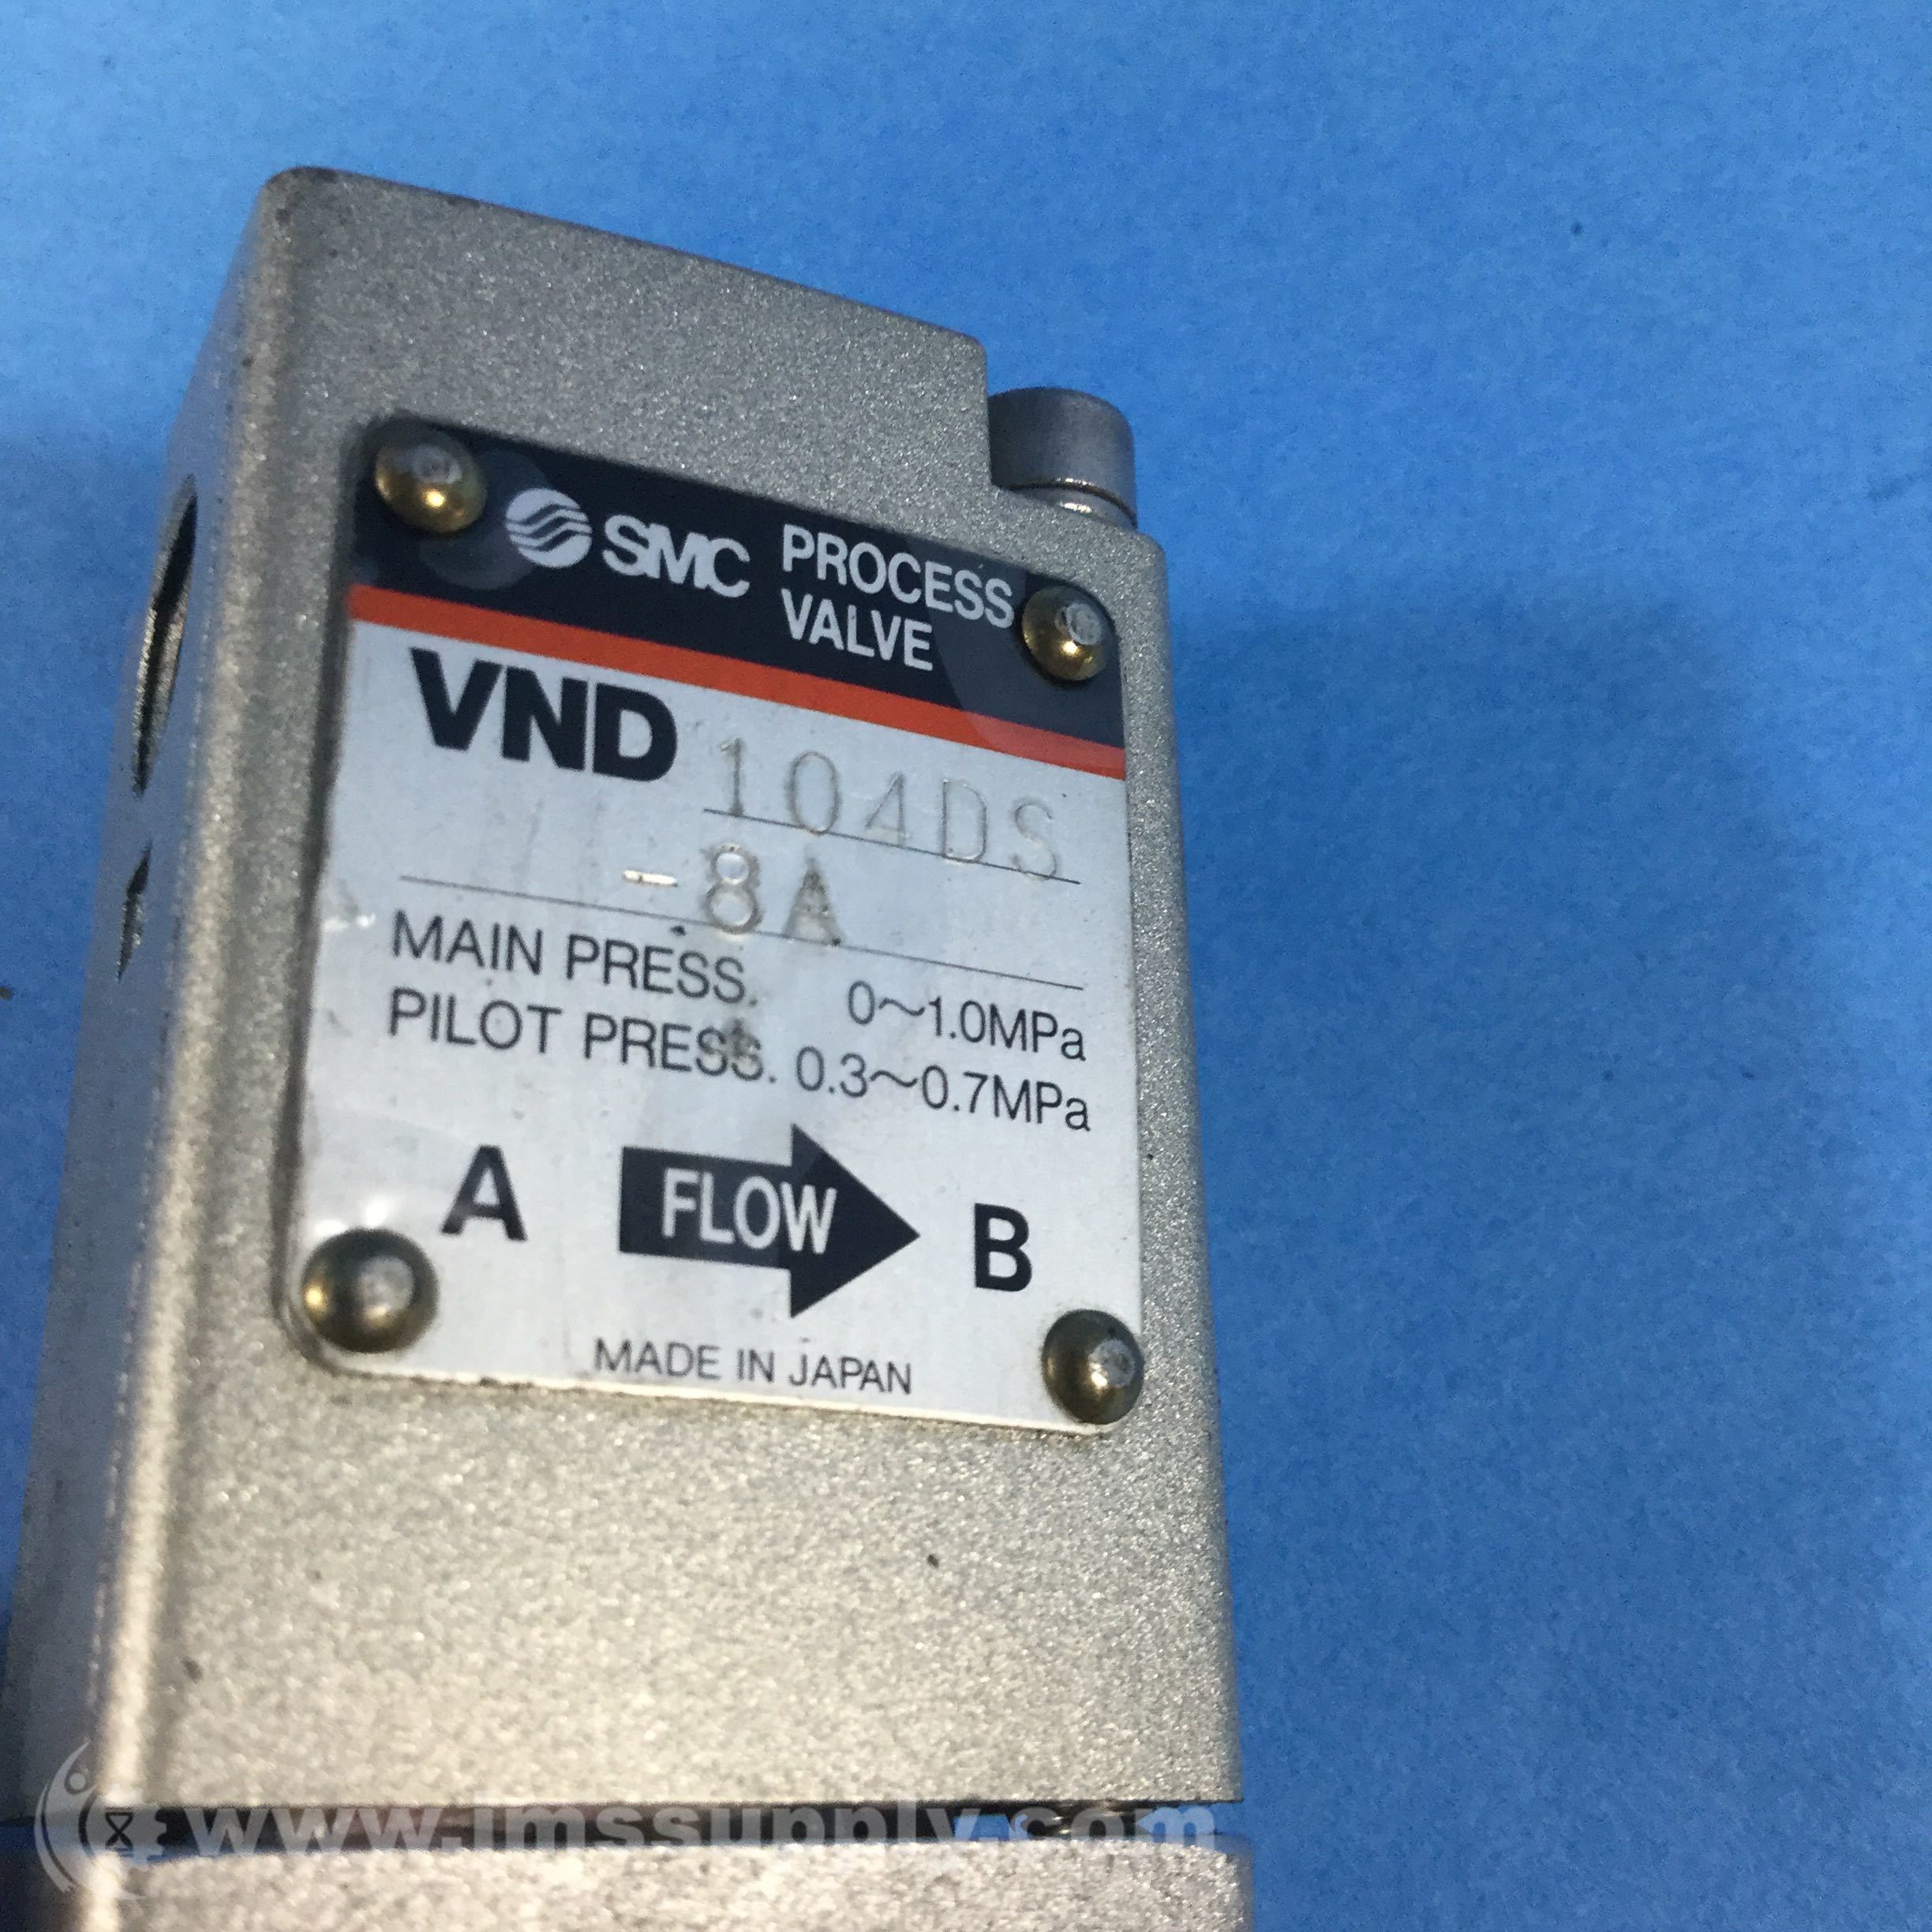 BRAND NEW SMC VND104DS-8A VND104DS8A 